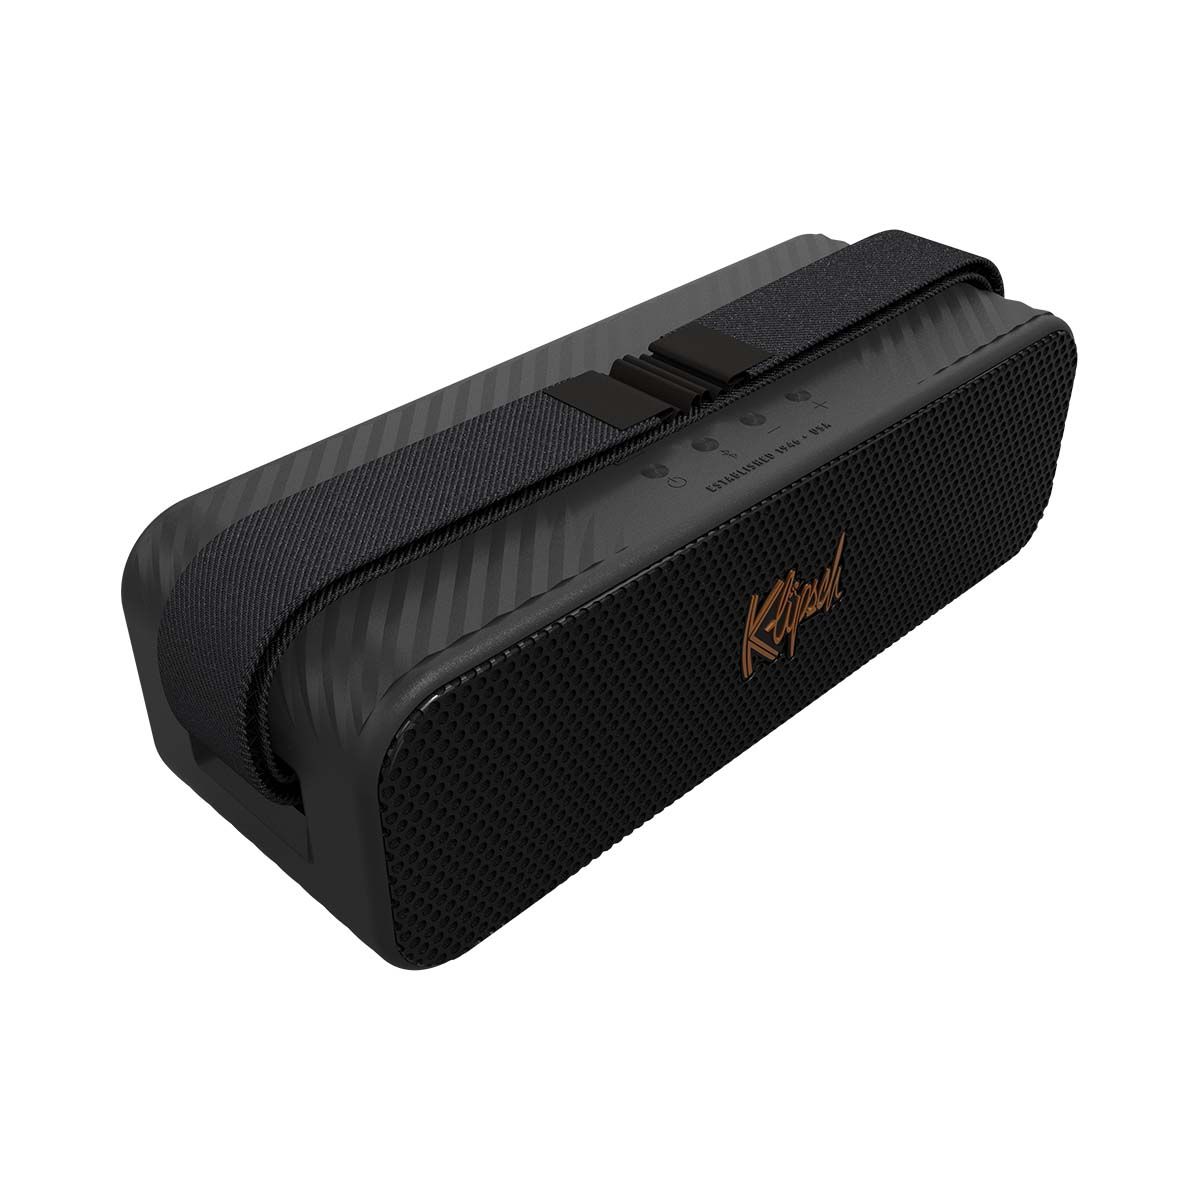 Klipsch Detroit Large Portable Bluetooth Speaker angled top view with strap